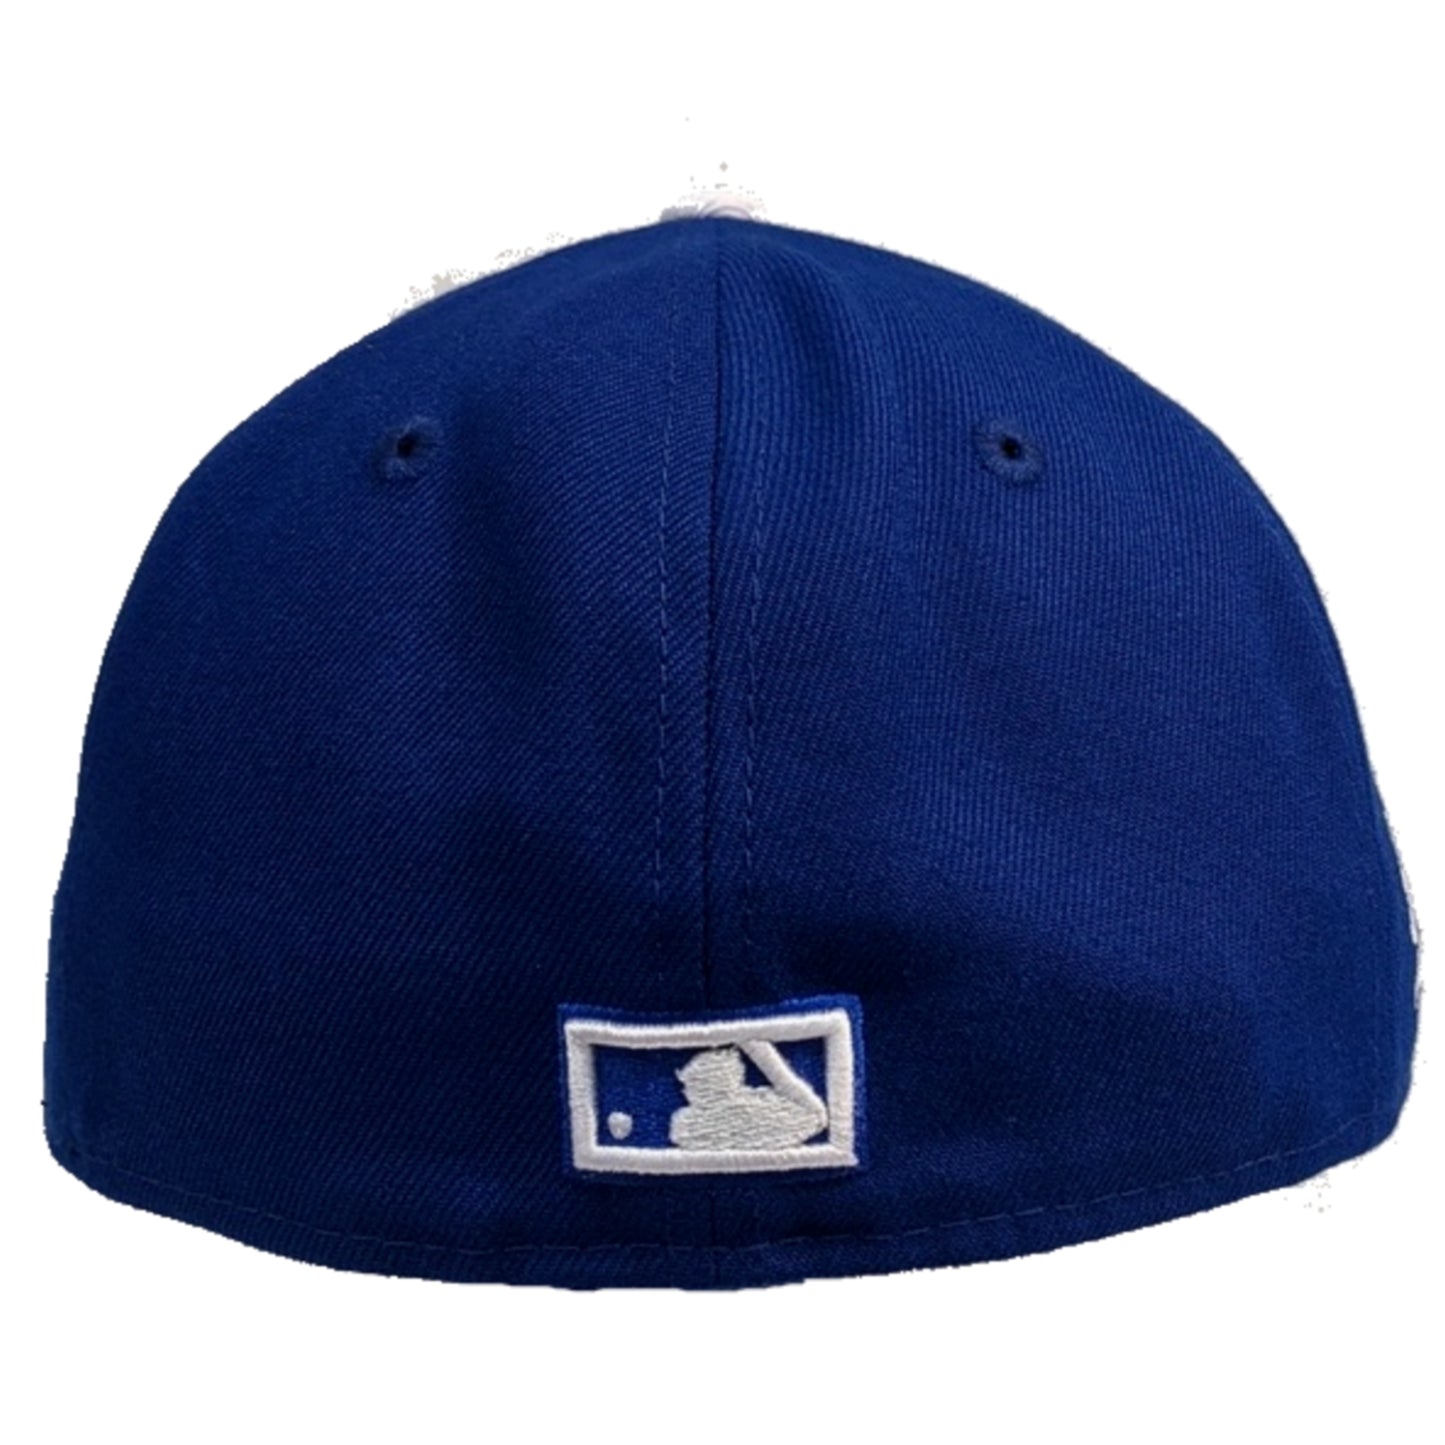 Chicago White Sox 1969 New Era 59FIFTY Fitted Hat - Royal Blue